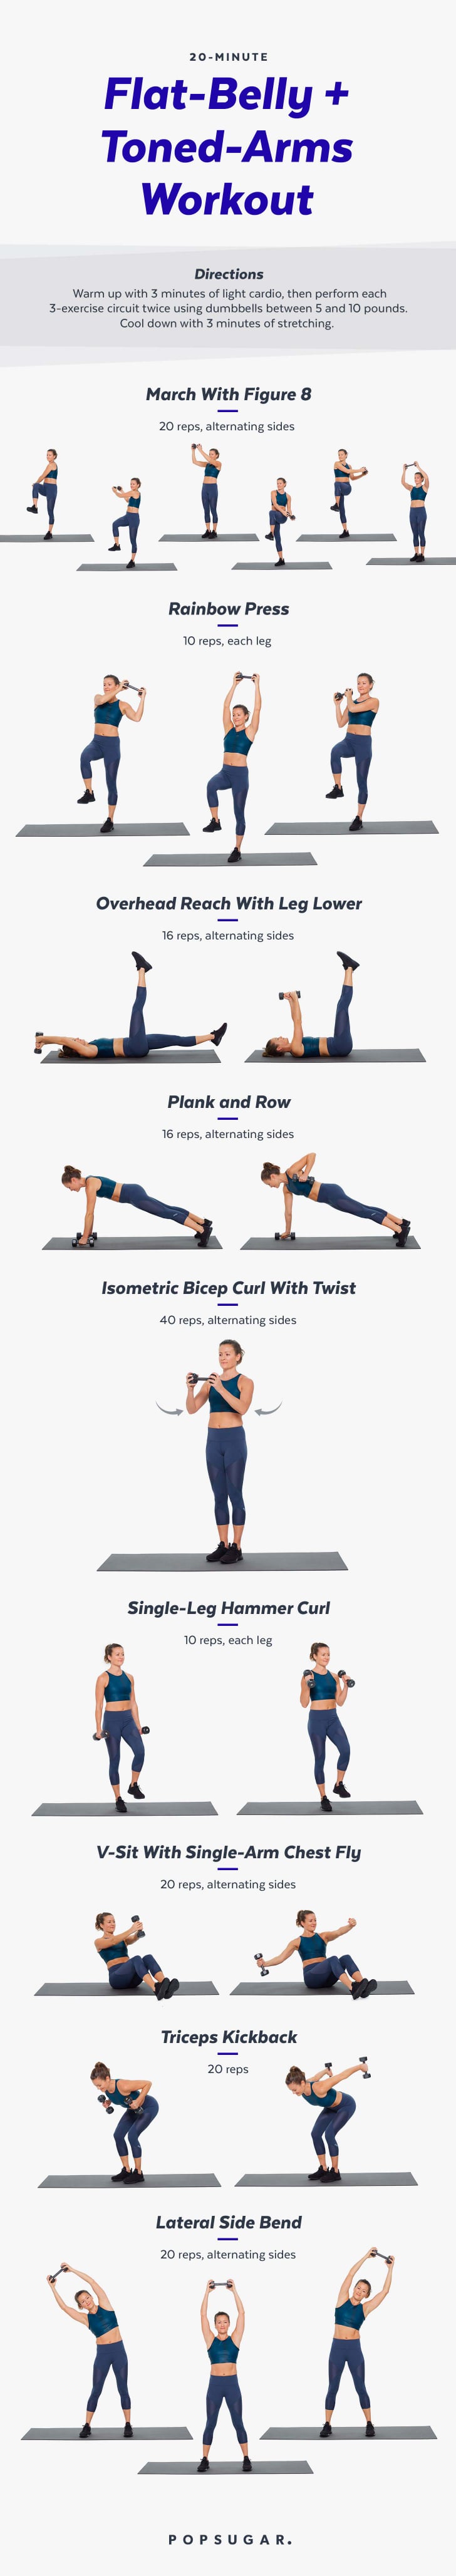 Work With Weights Printable Workouts For Arms And Abs Popsugar